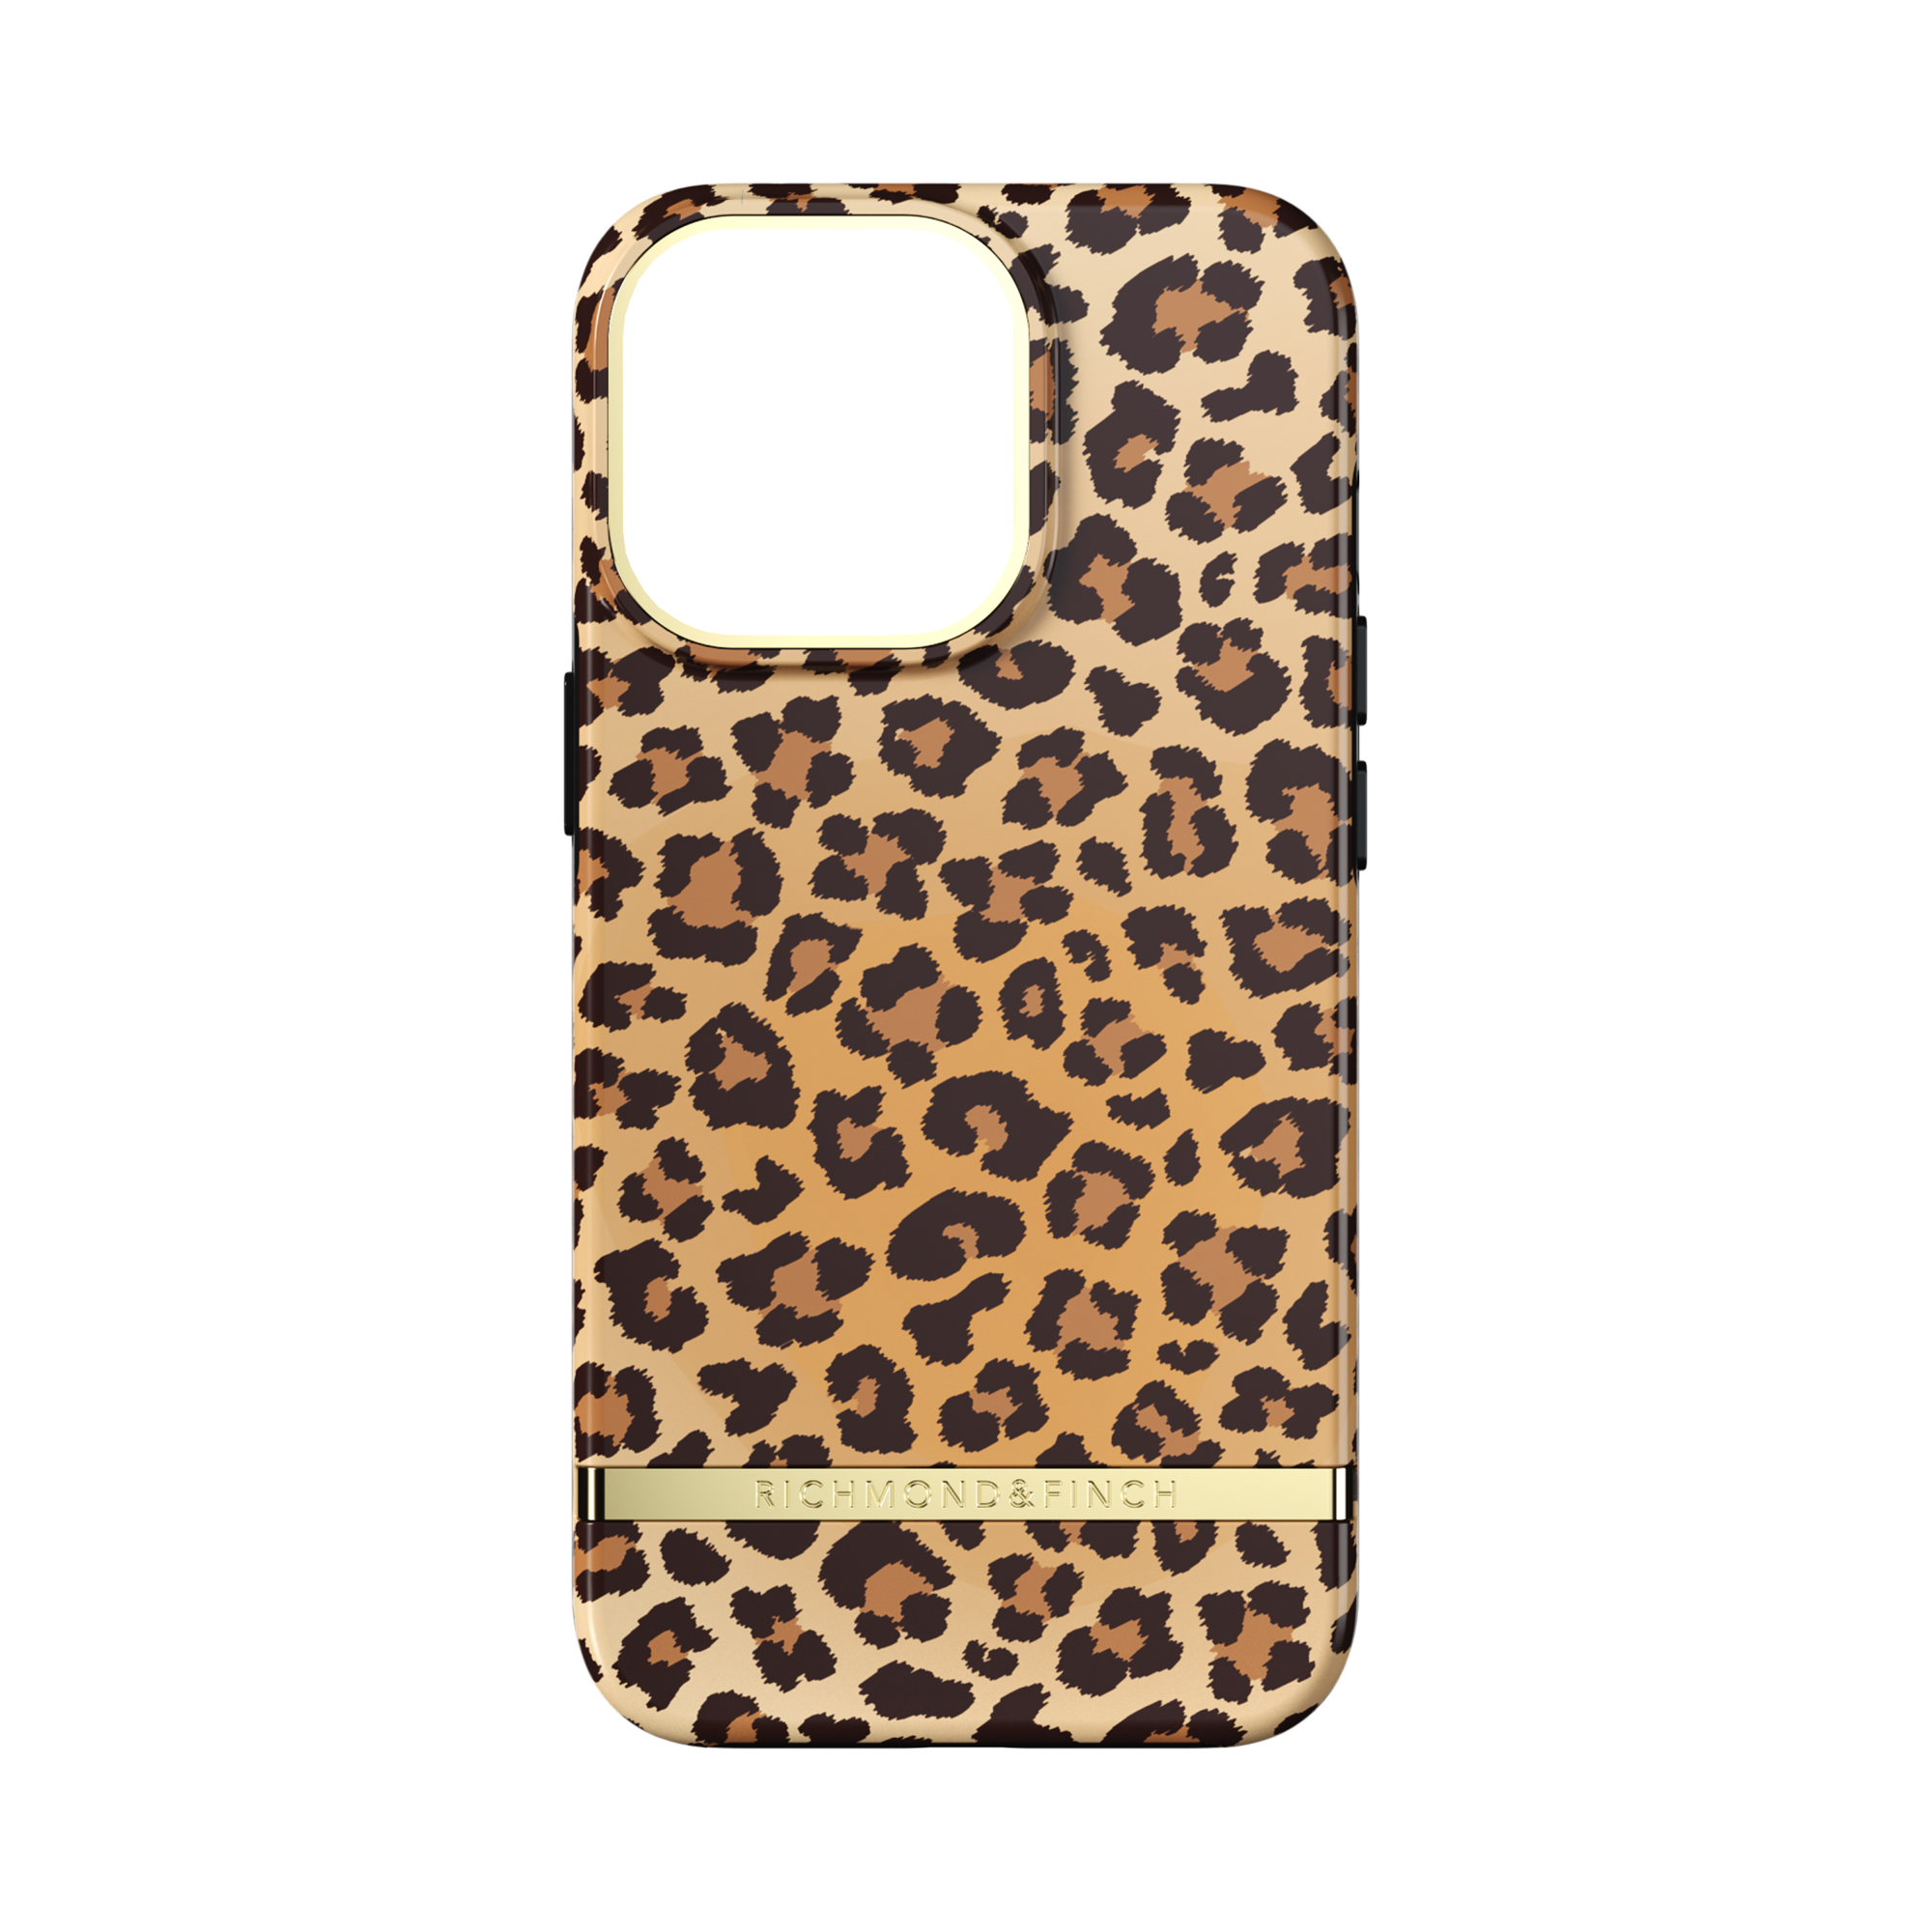 IPHONE Backcover, FINCH iPhone Pro, PRO, & APPLE, RICHMOND Soft 13 13 Leopard YELLOW